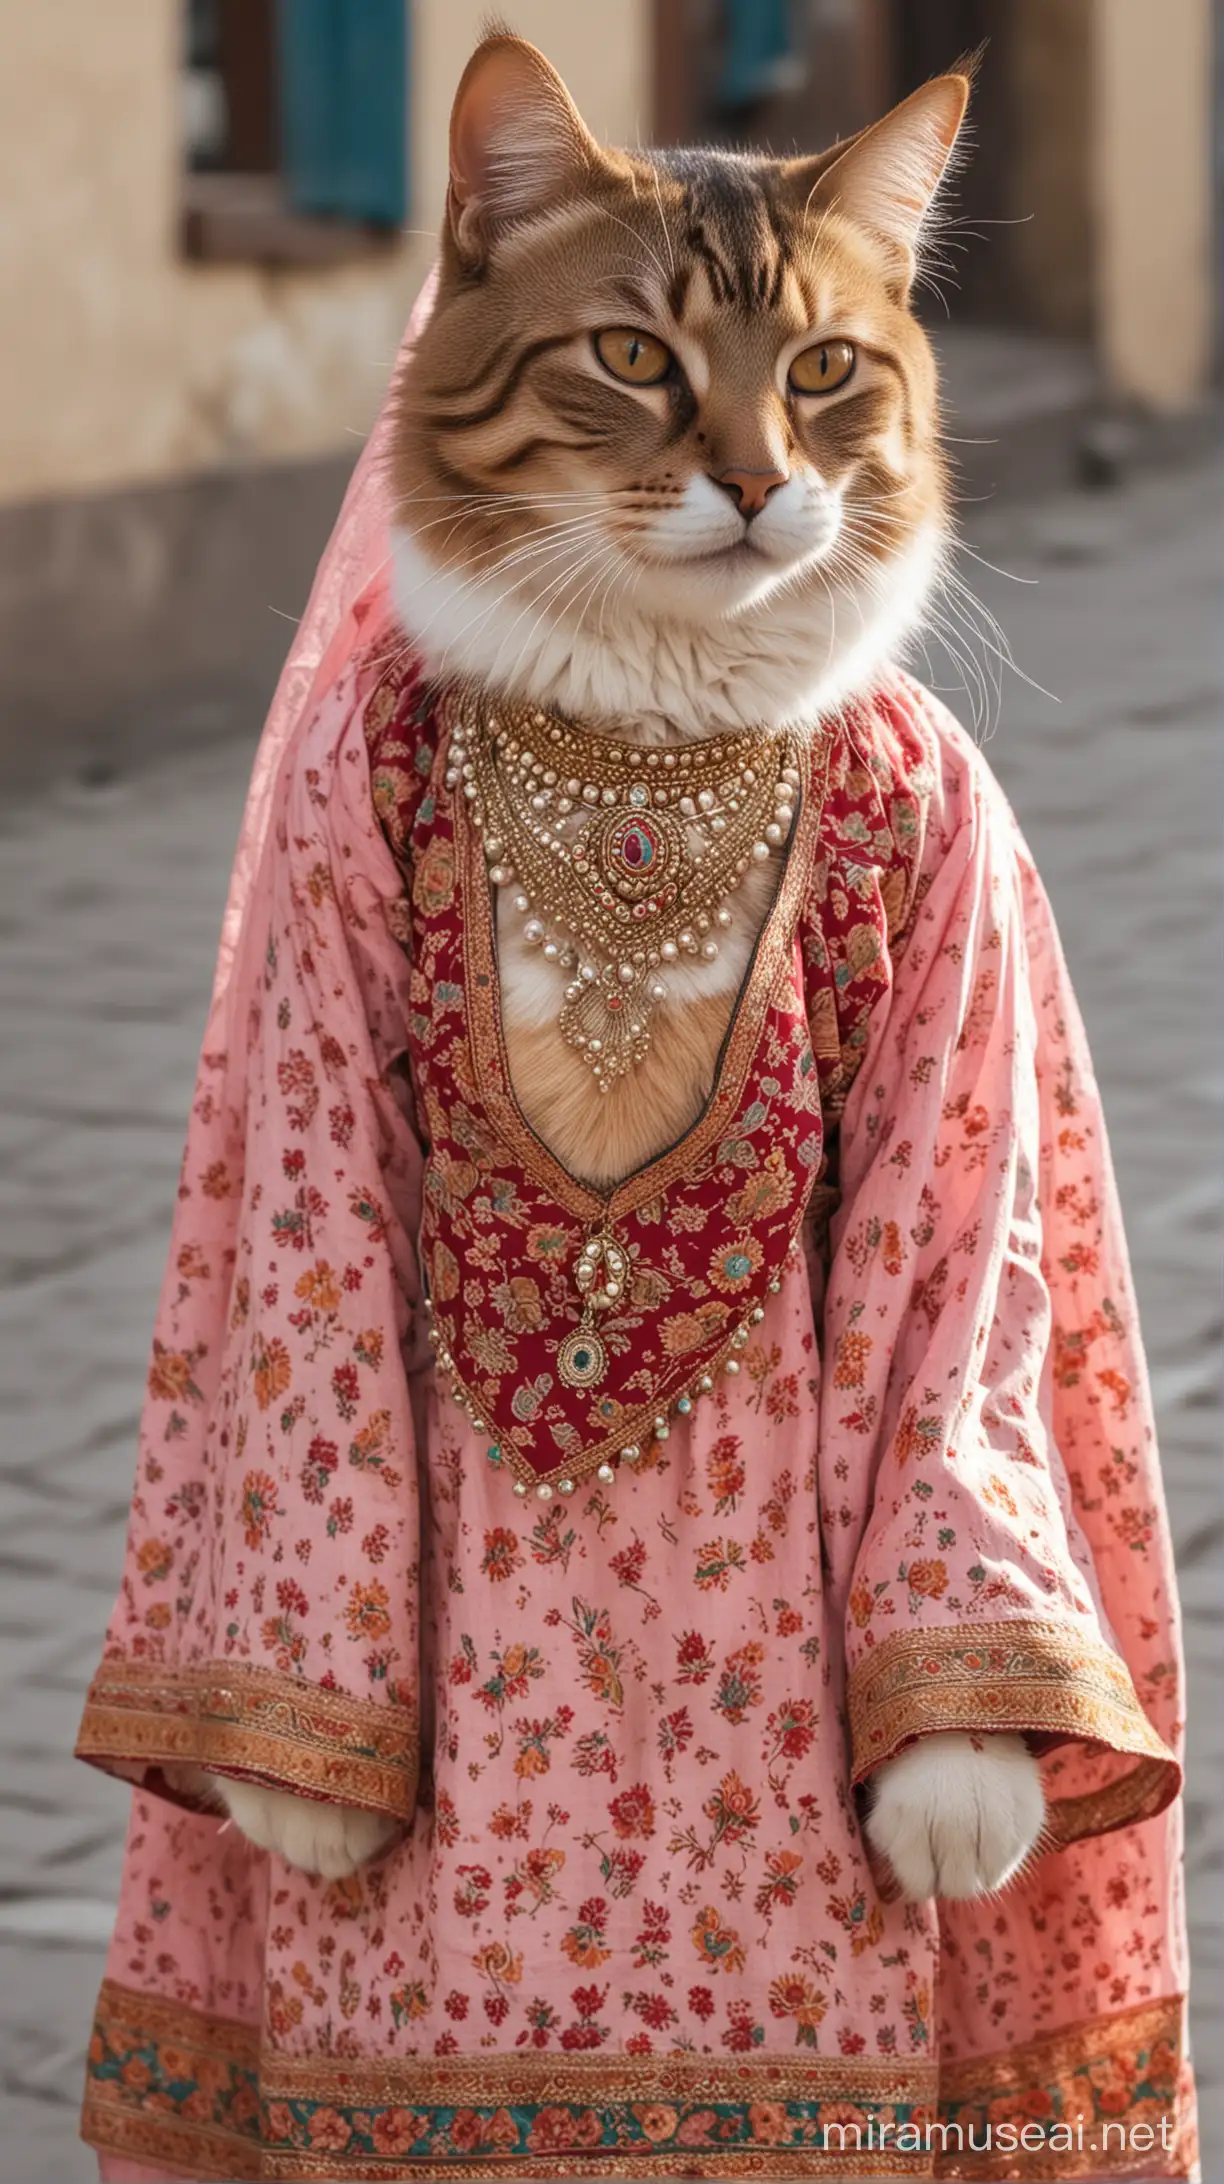 A pretty girl cat wearing india clother in street, smiling face